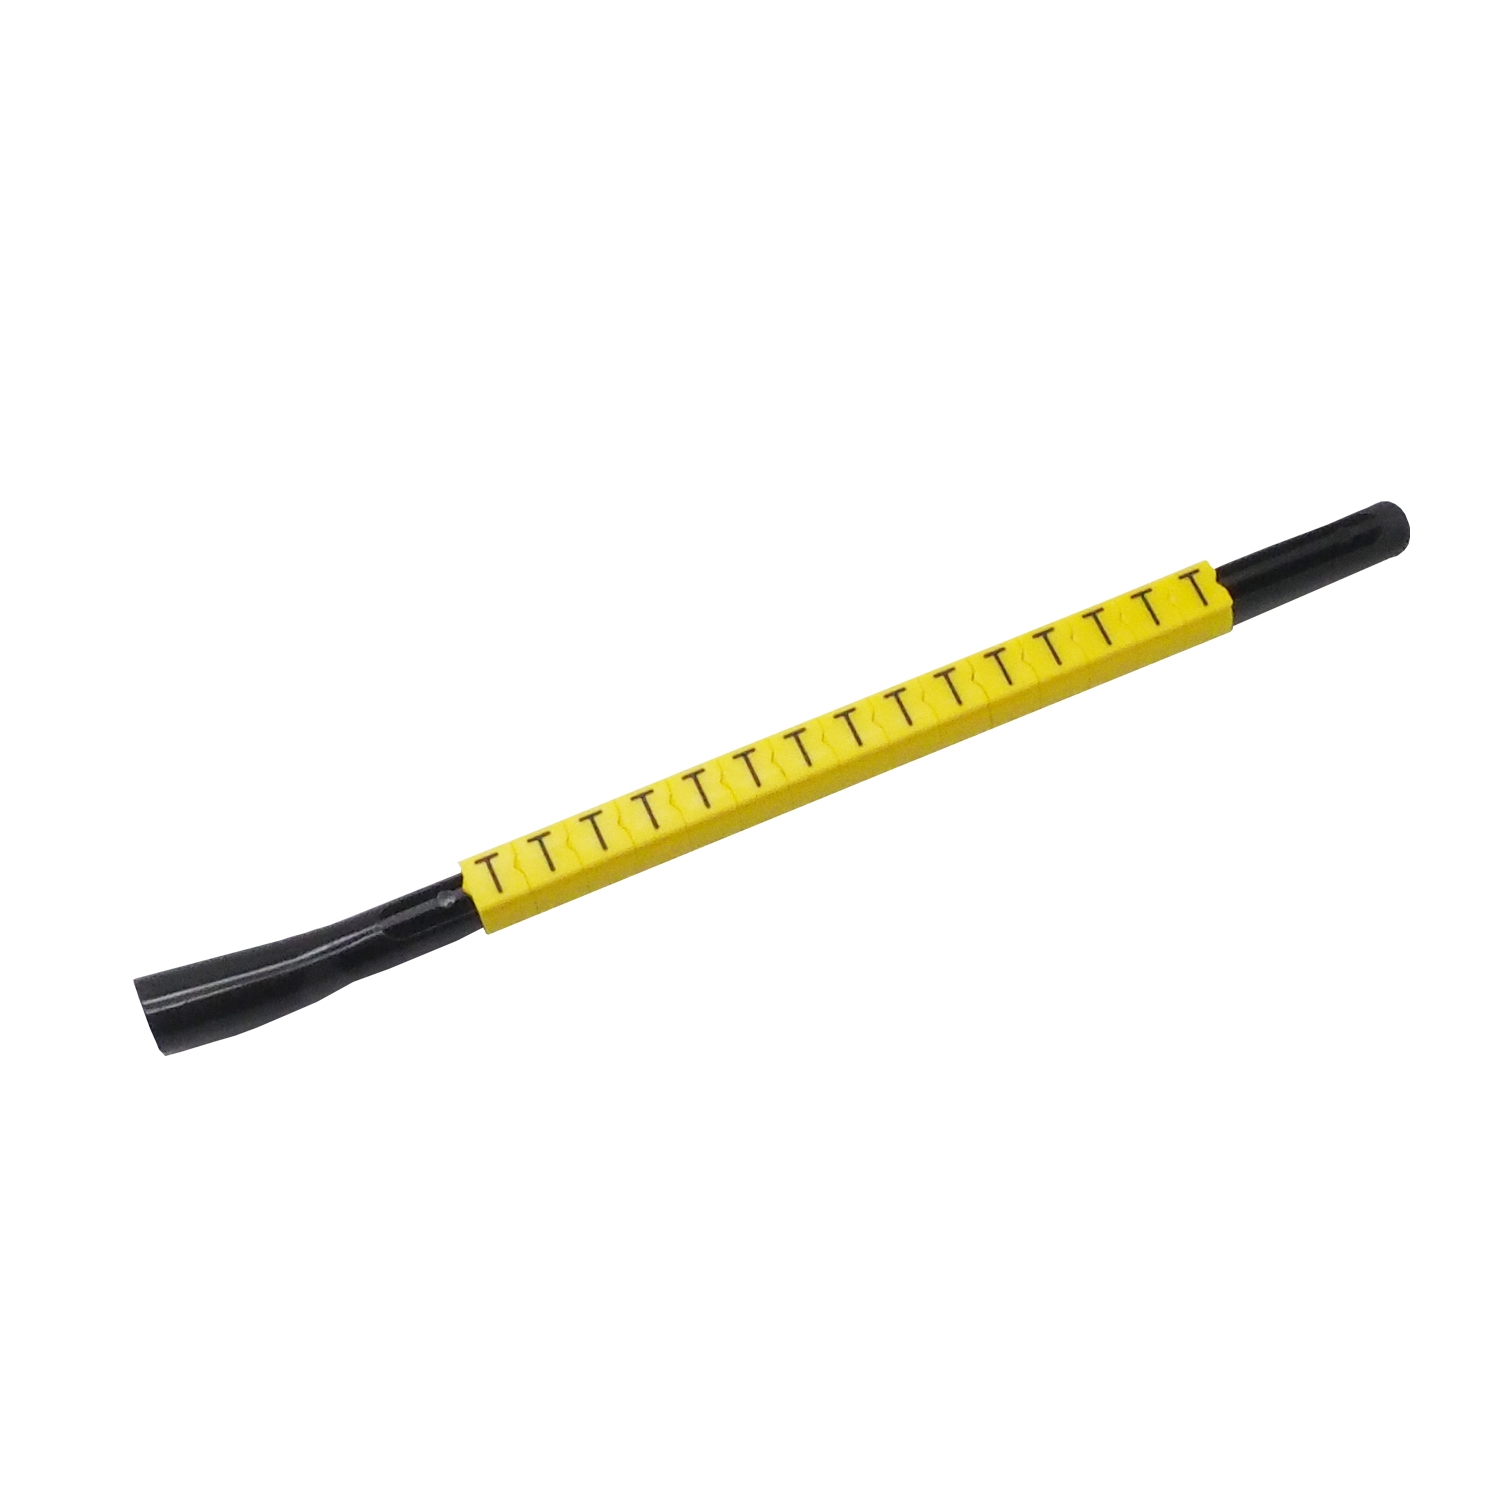 LT-030 Cable wire marker